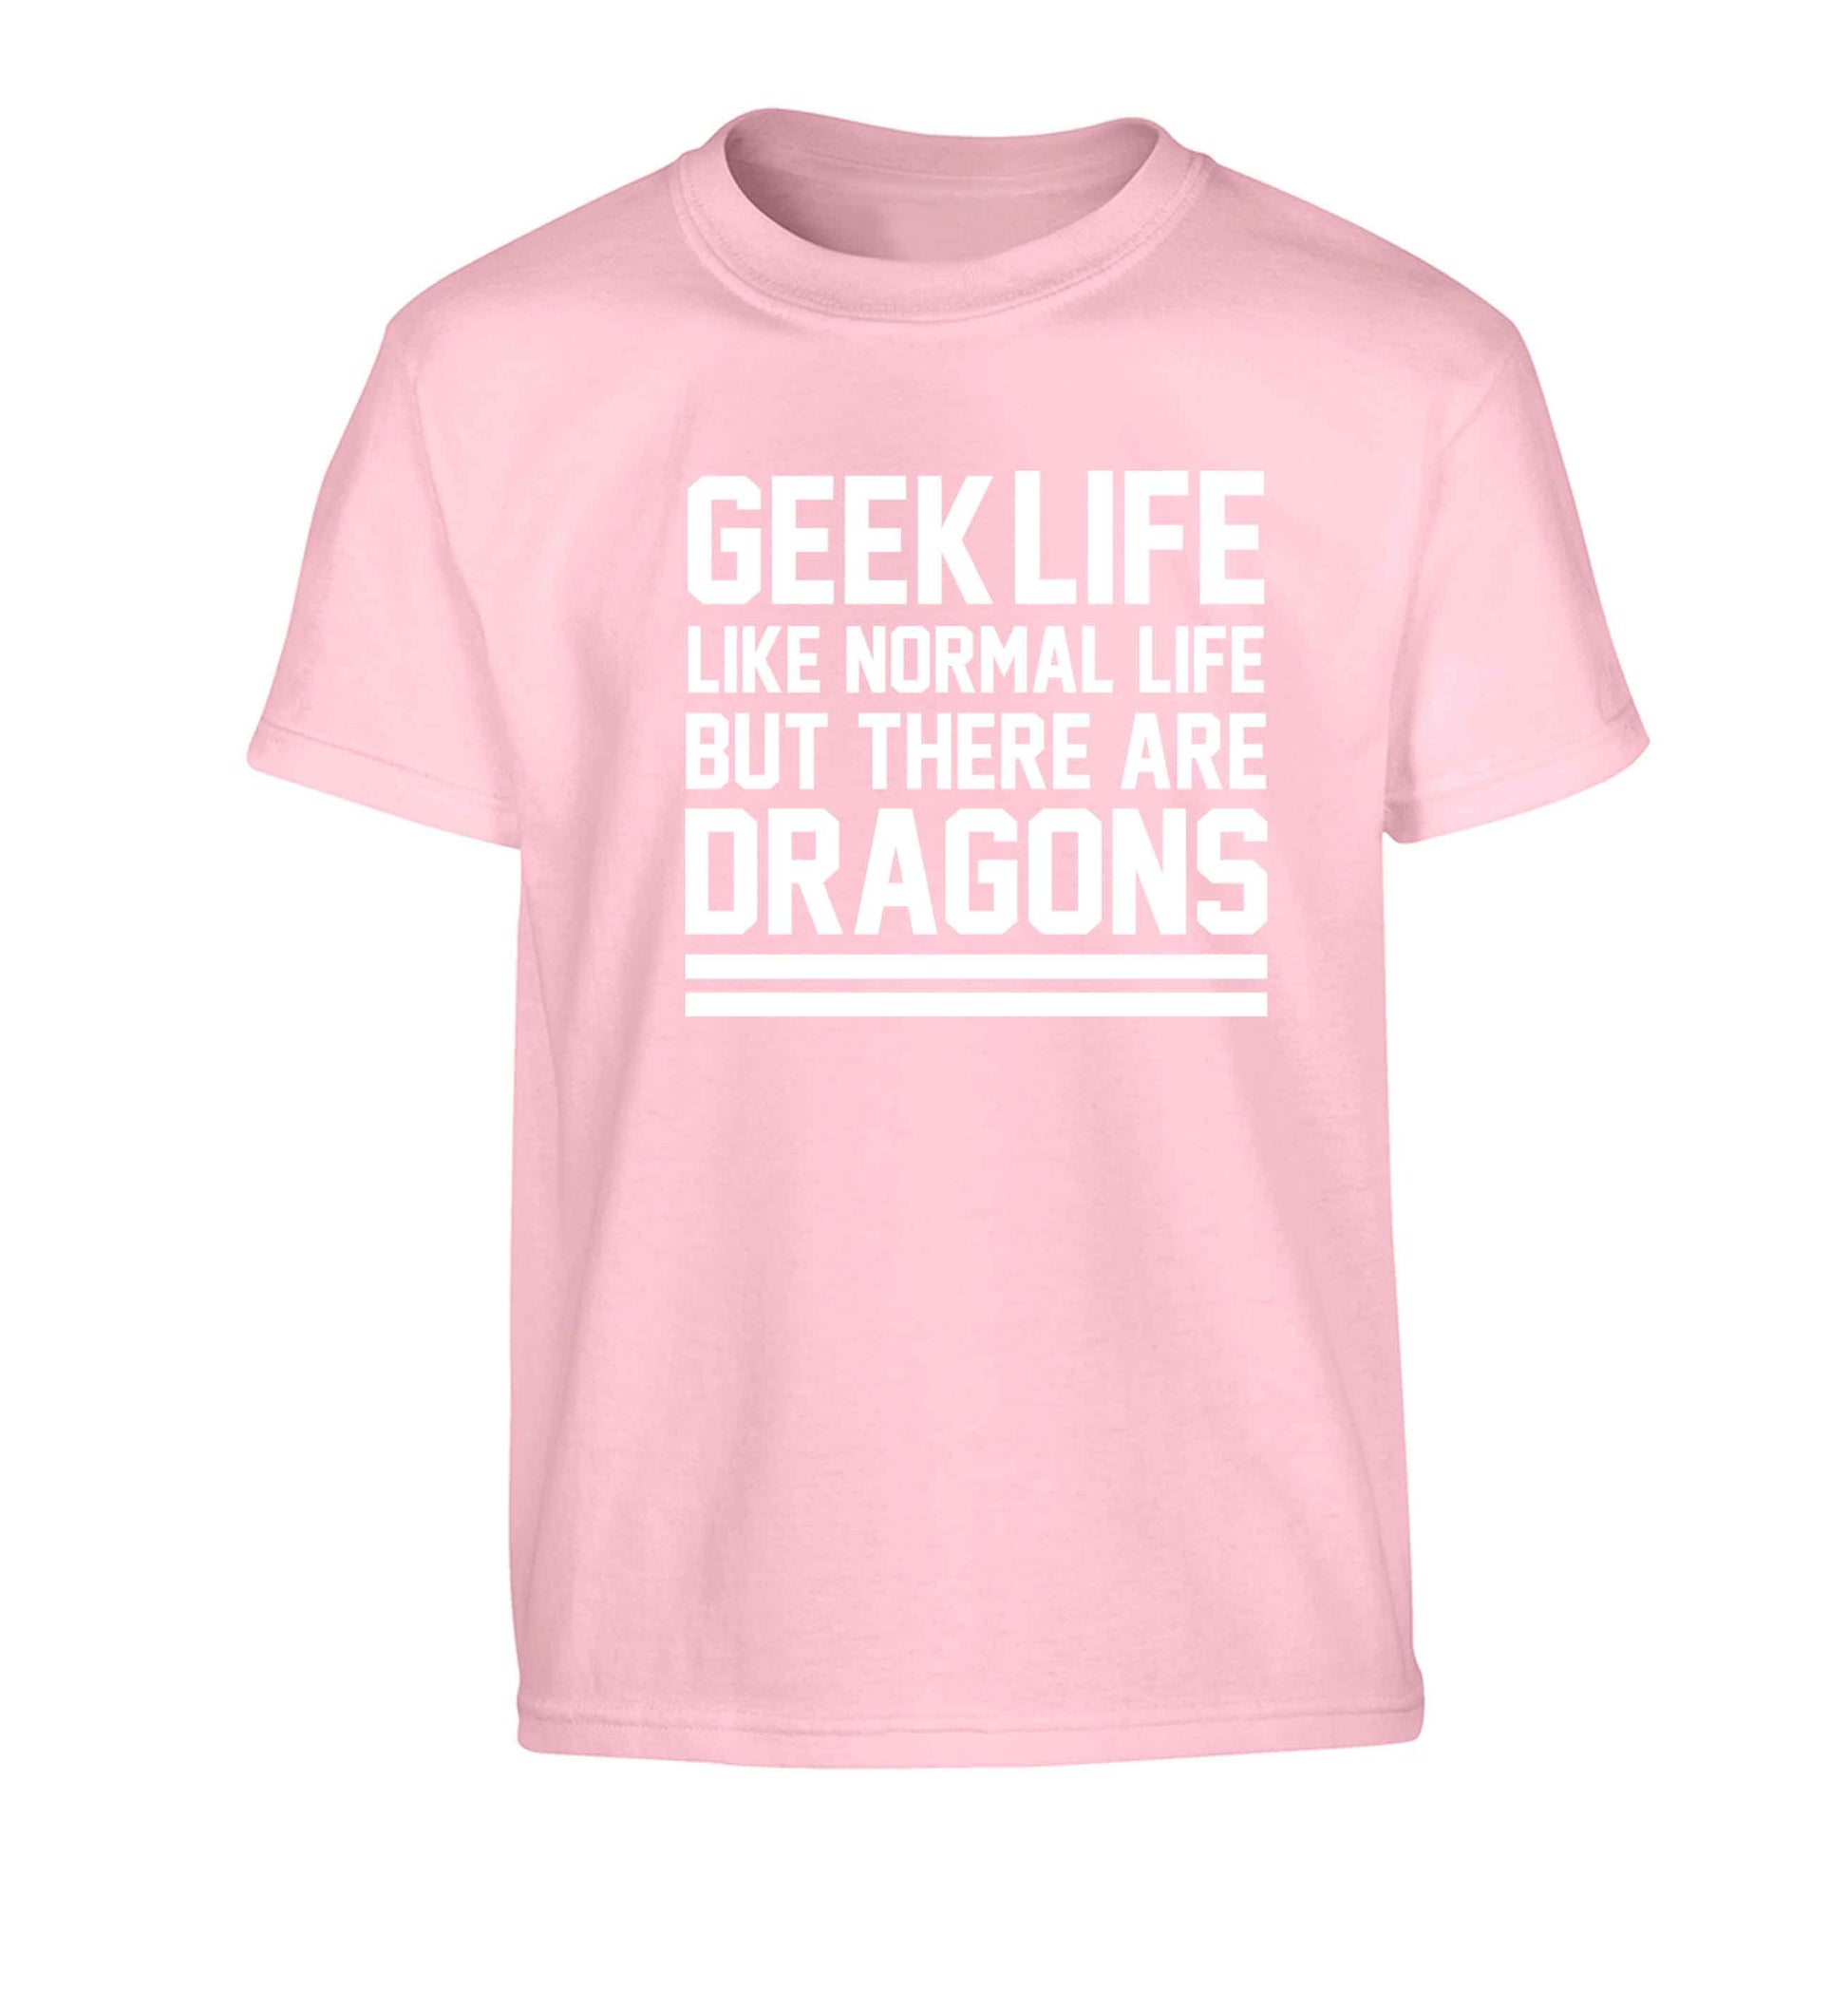 Geek life like normal life but there are dragons Children's light pink Tshirt 12-13 Years